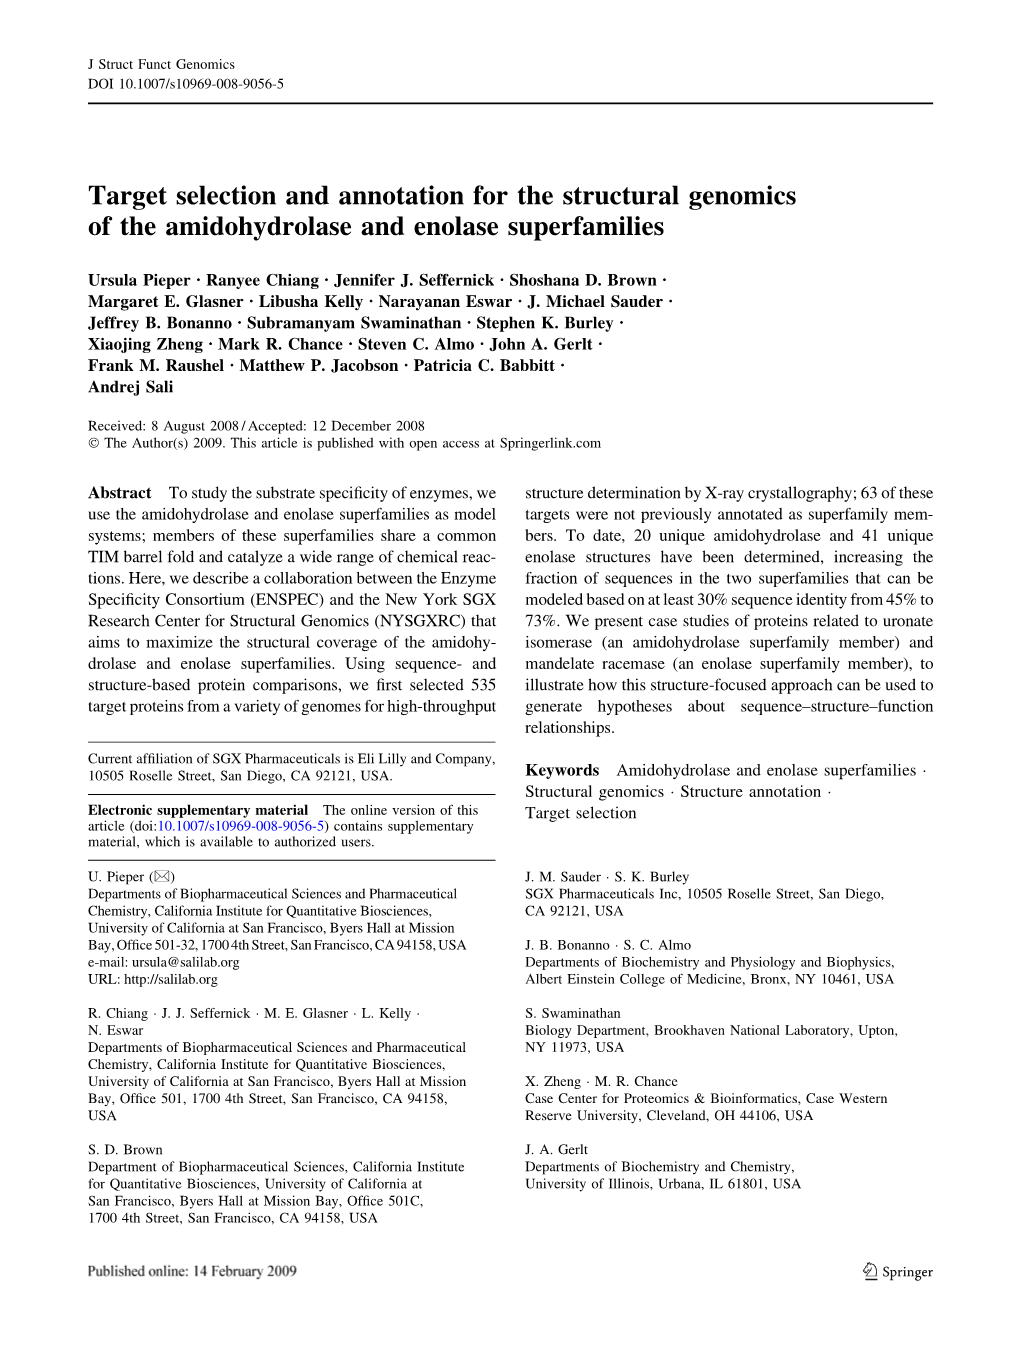 Target Selection and Annotation for the Structural Genomics of the Amidohydrolase and Enolase Superfamilies